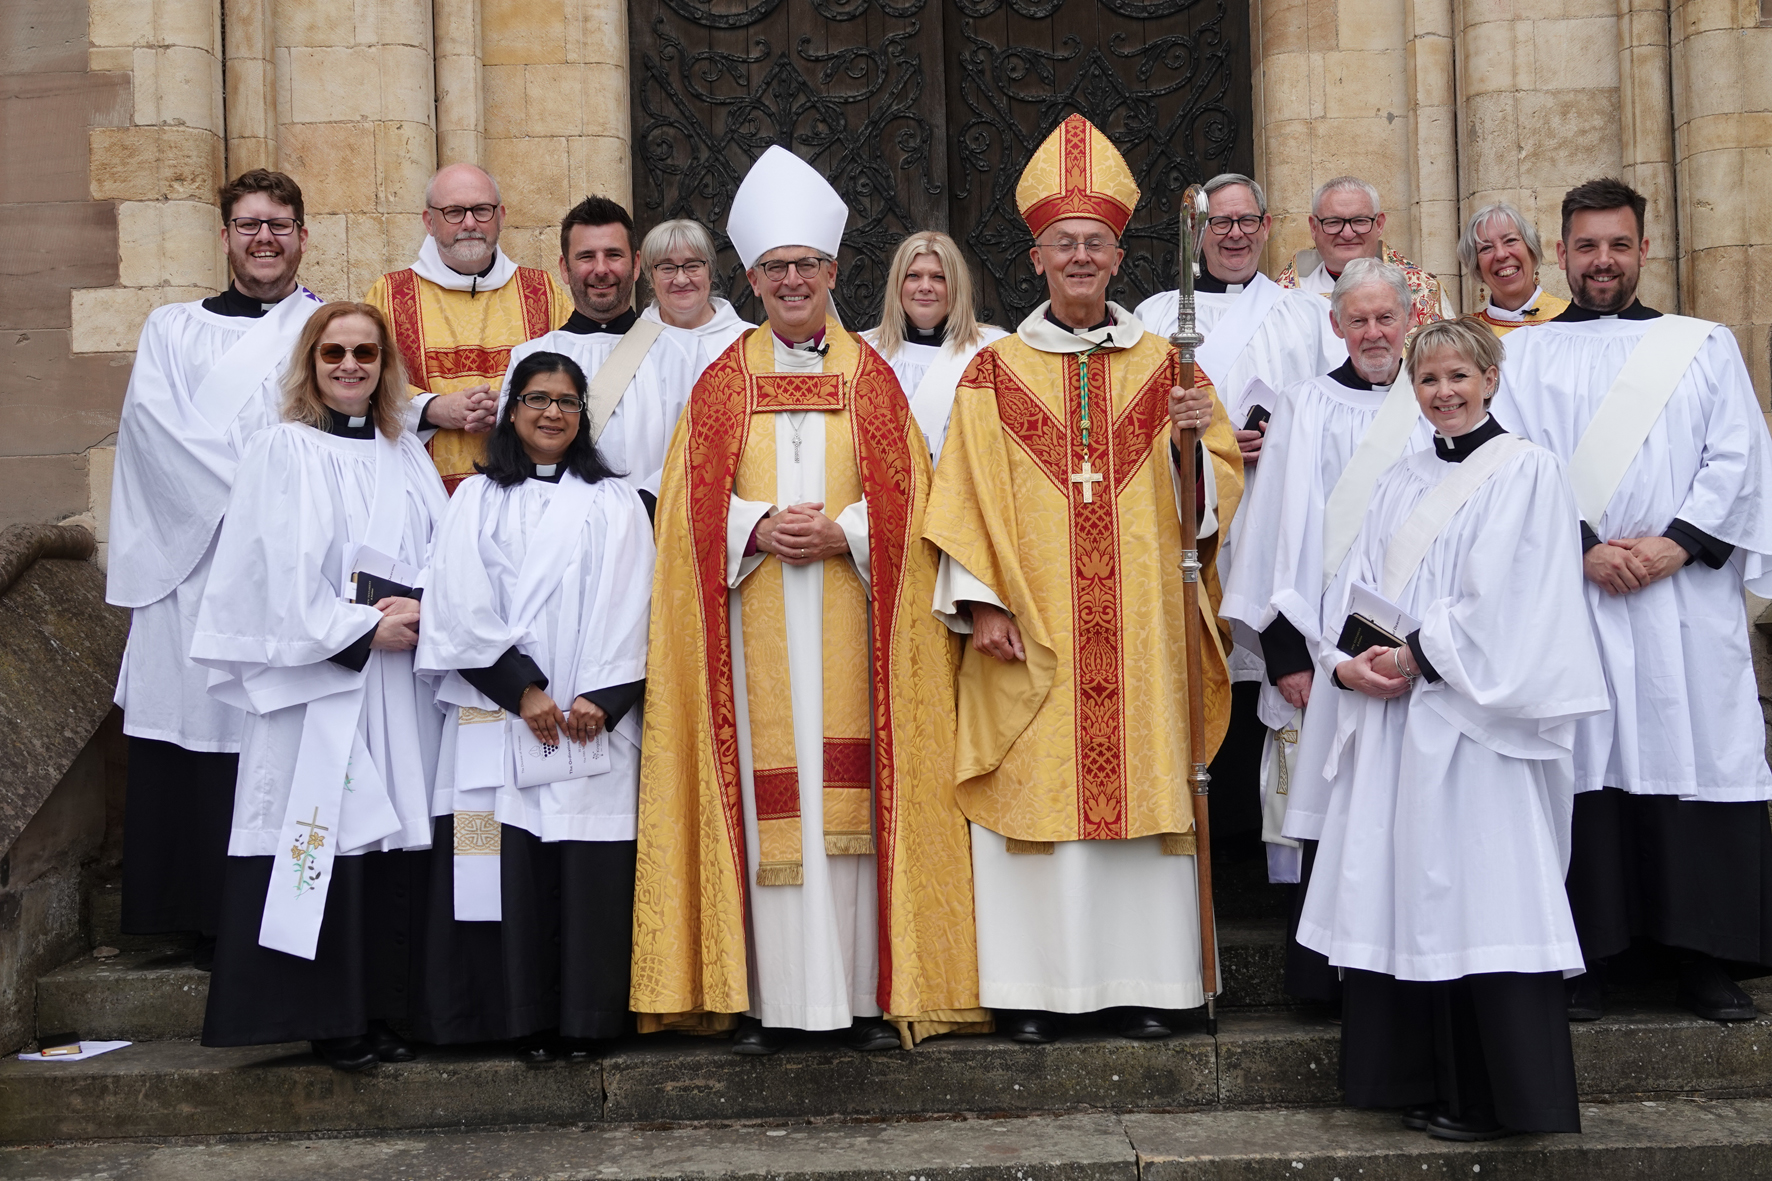 Newly ordained deacons standing outside the cathedral with the bishops